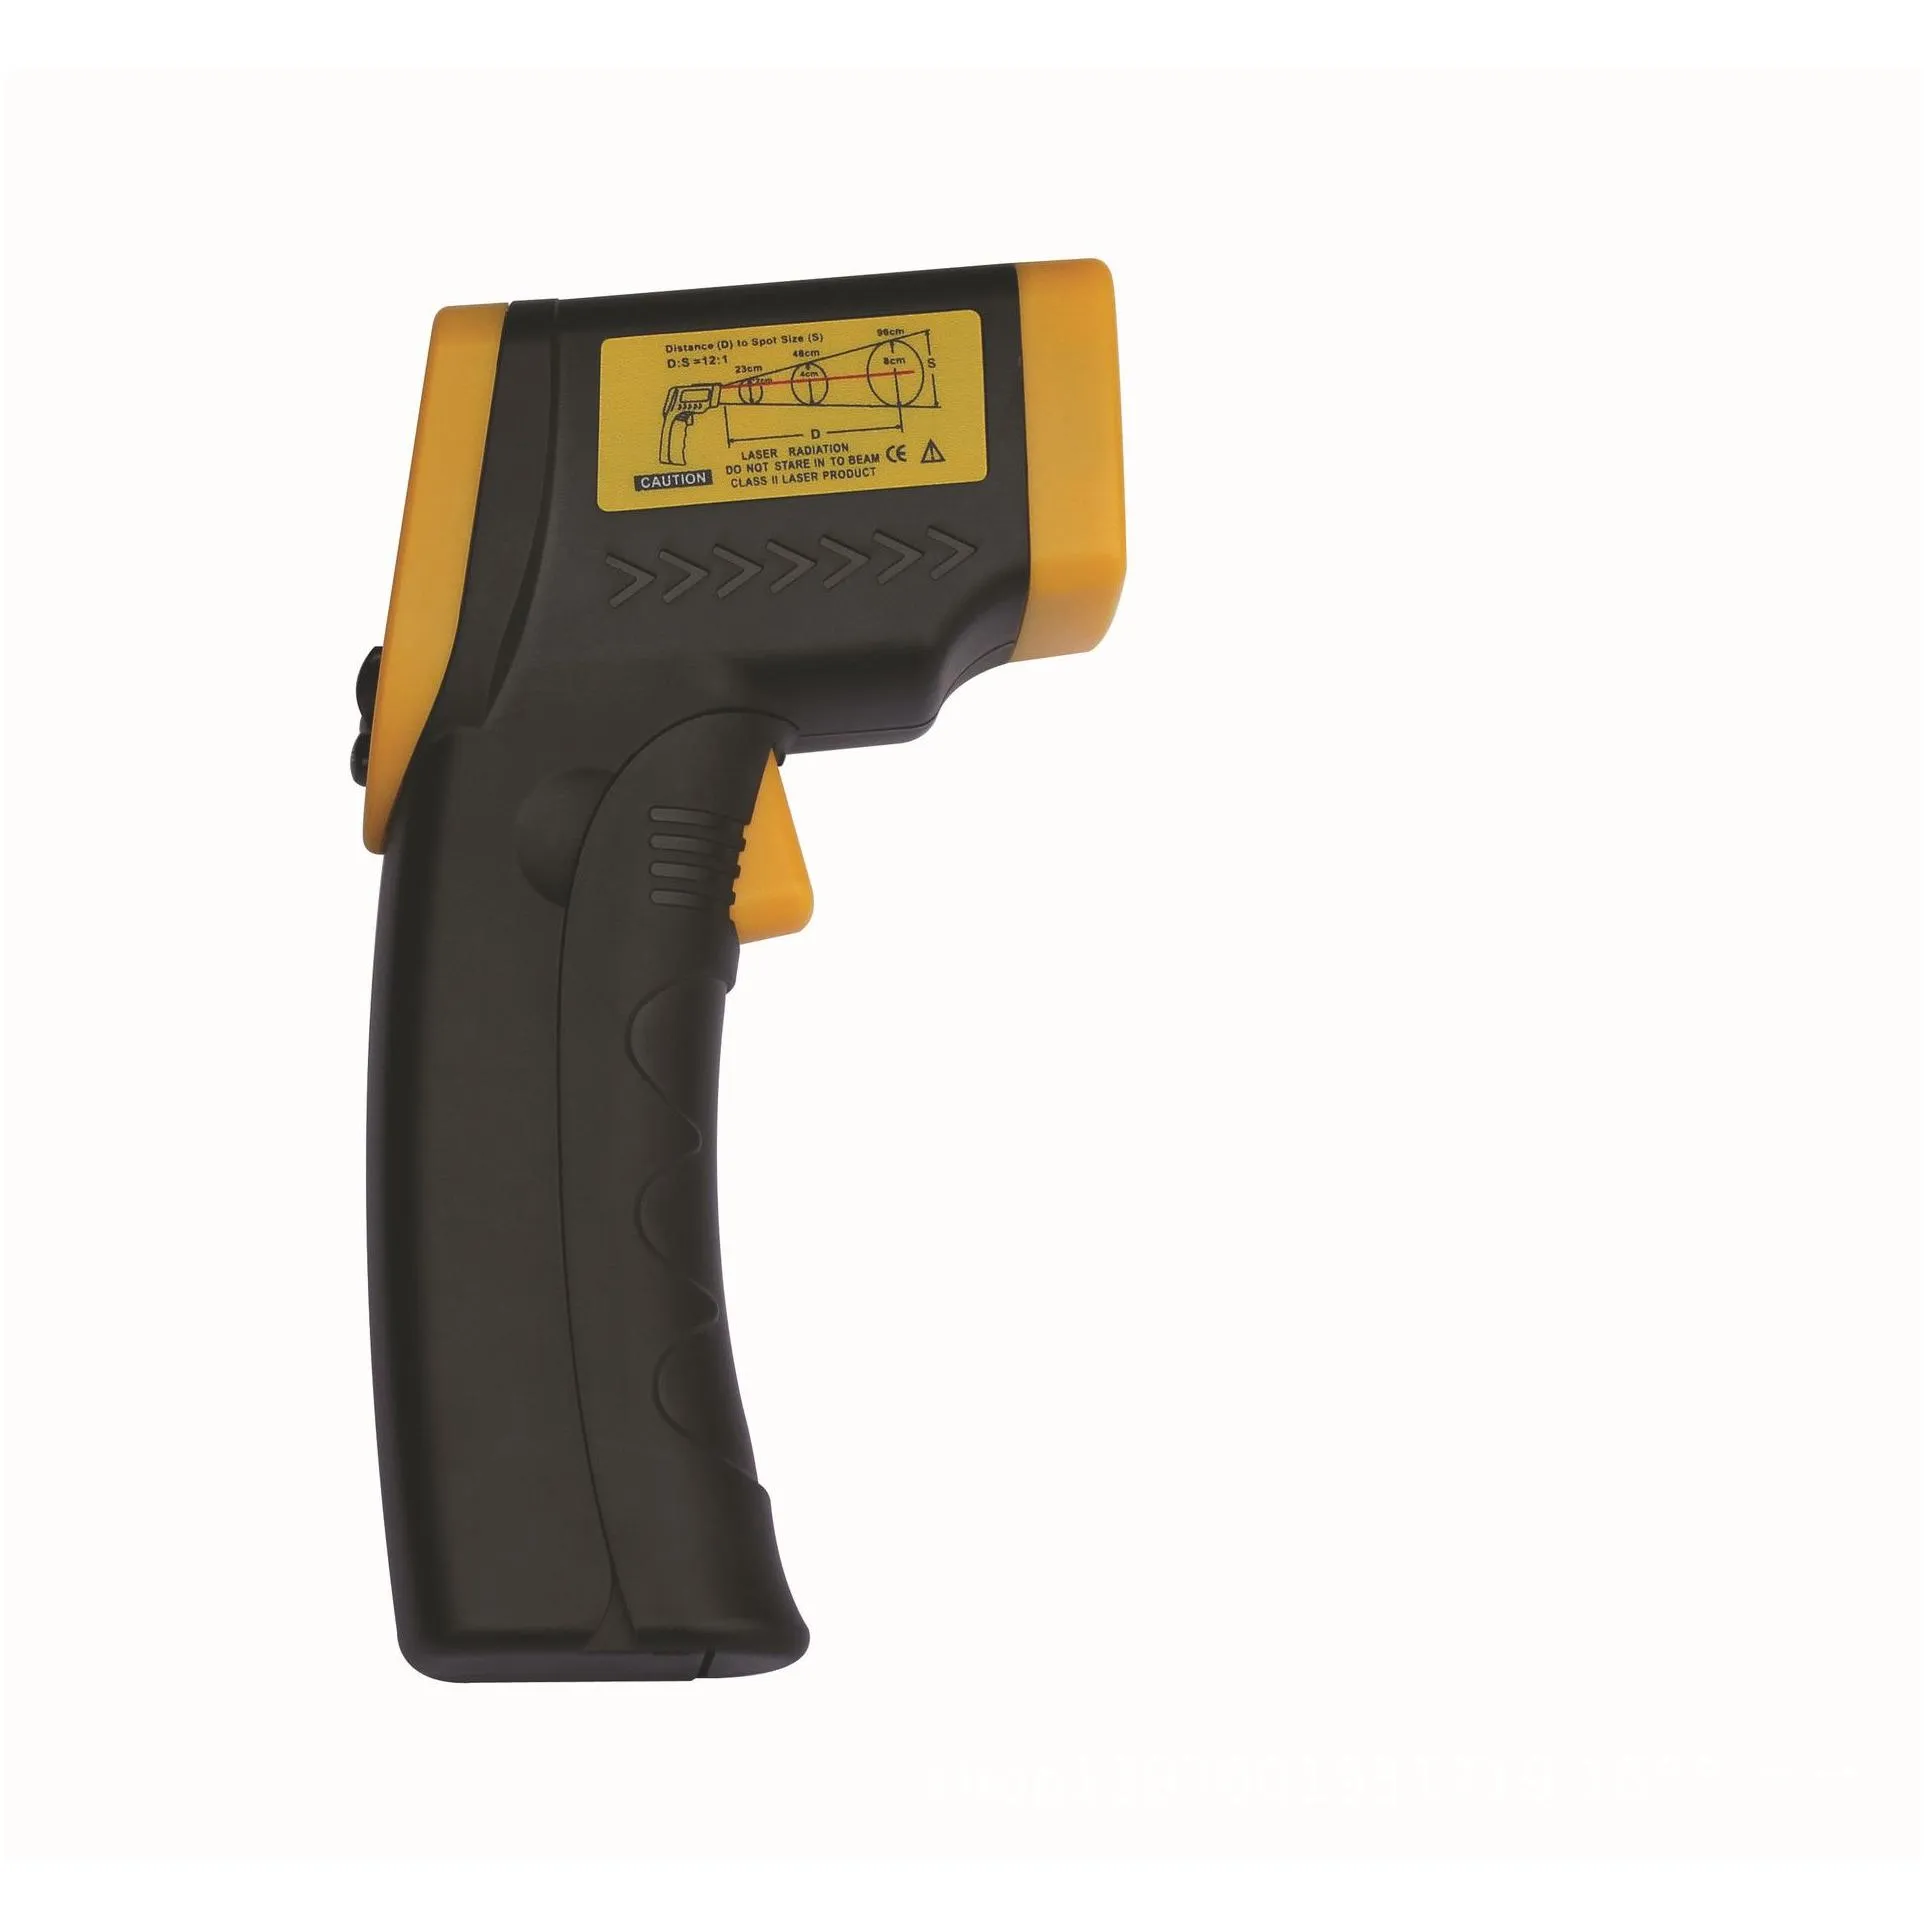 Temperature Instruments Wholesale Hand-Held Non-Contact Ir Laser Infrared Digital Thermometer Dt380 -50-380C Gt Fedex Fast Shipment Dr Dhipx